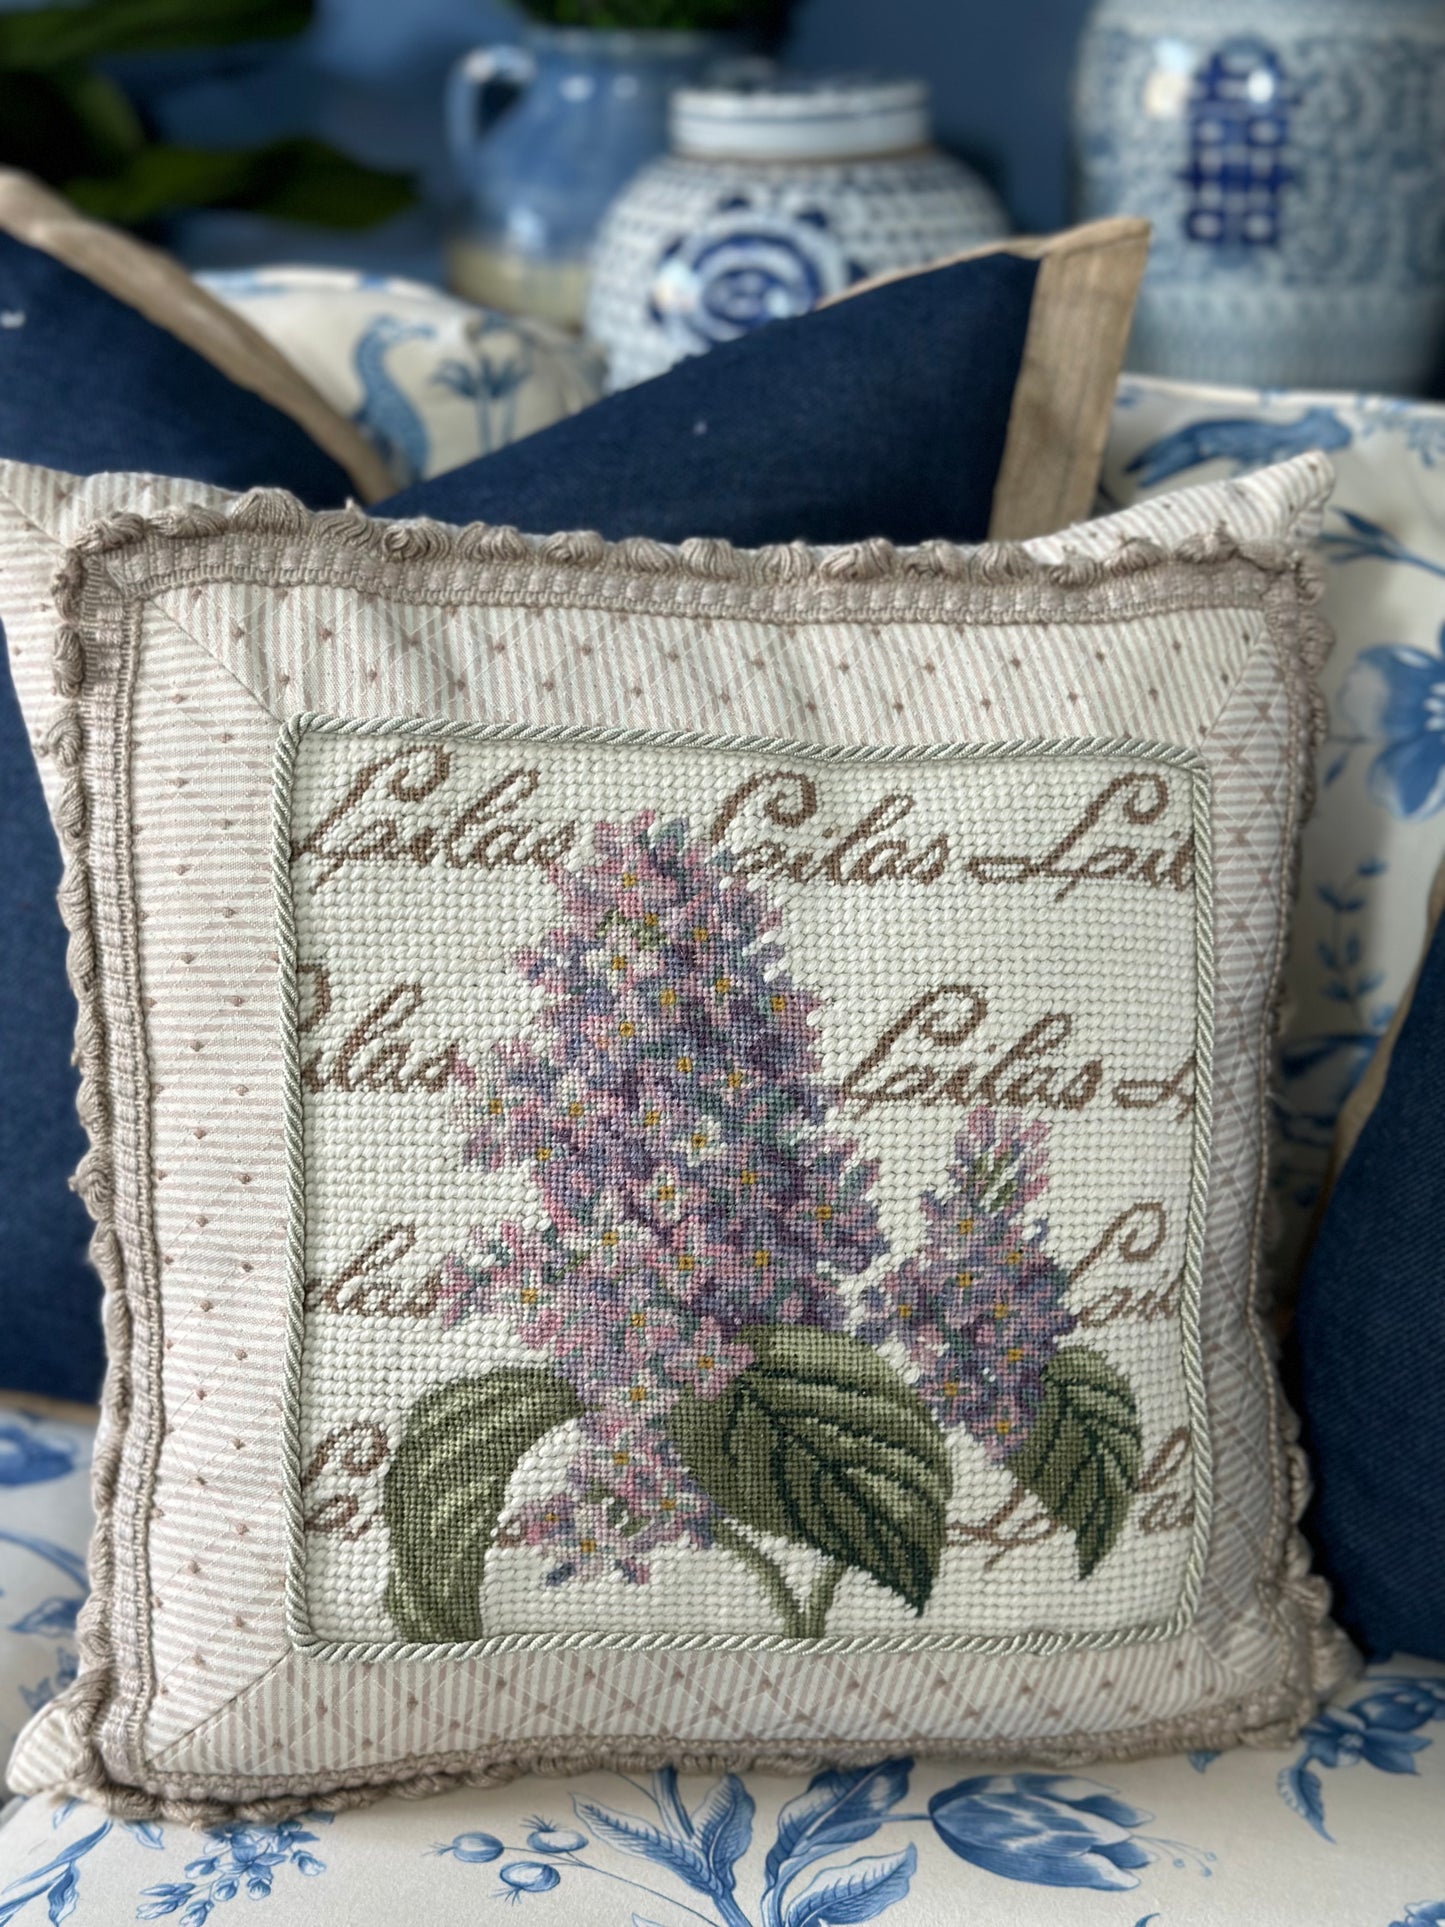 Vintage Needlepoint Pillow, Lilac- 14x14". Excellent Condition!